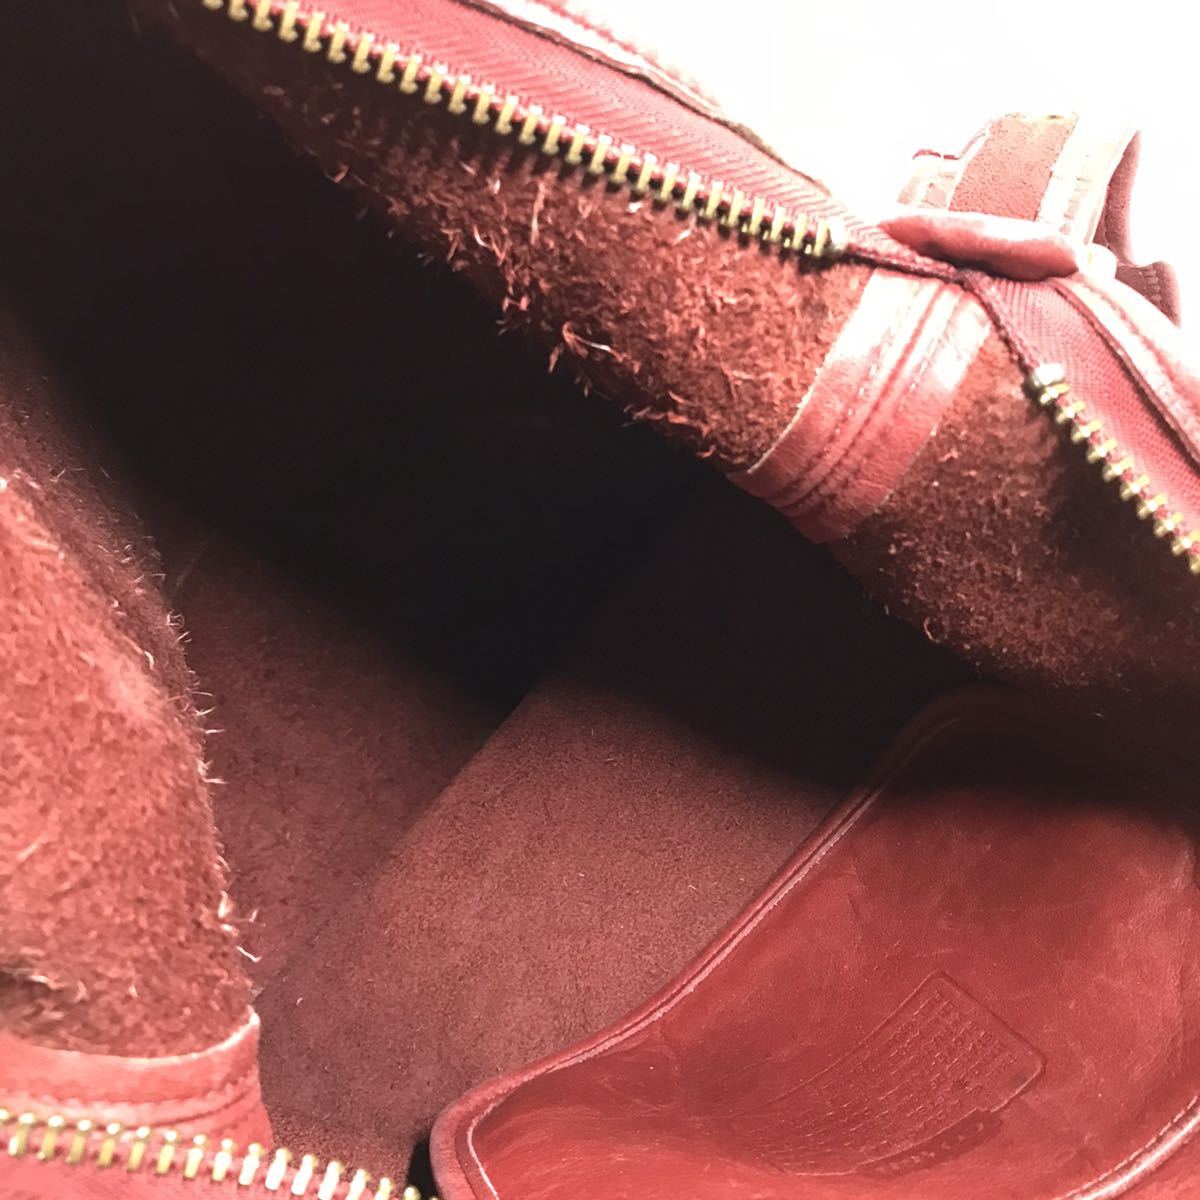 [ Coach ] genuine article COACH shoulder bag Old Coach red color series bucket type original leather for women lady's USA made 